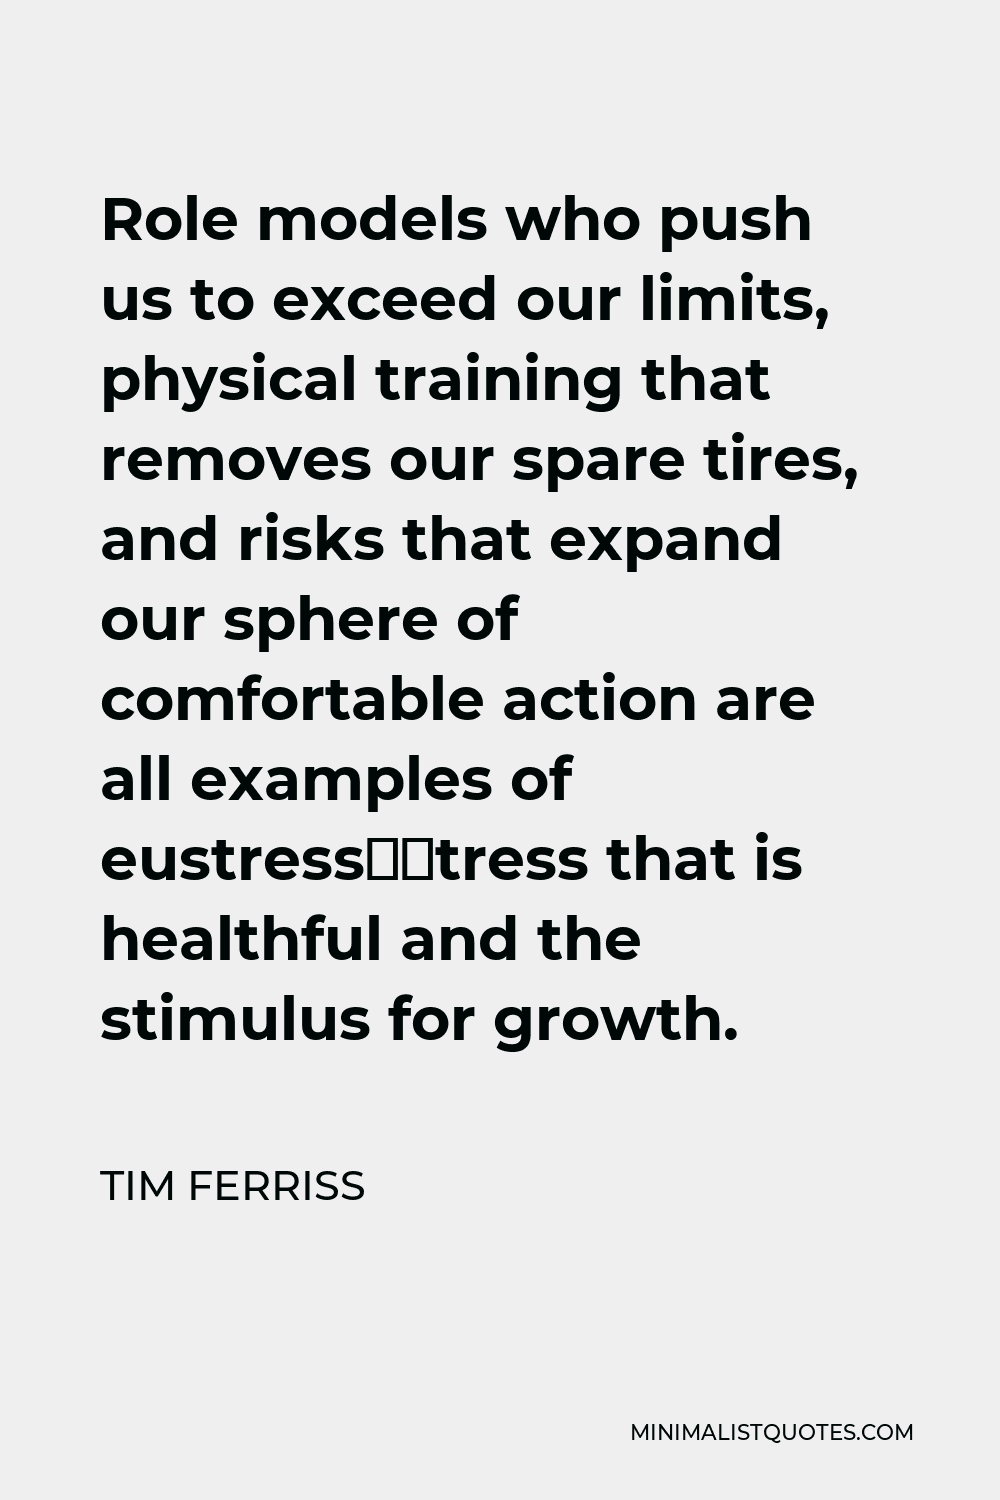 Tim Ferriss Quote - Role models who push us to exceed our limits, physical training that removes our spare tires, and risks that expand our sphere of comfortable action are all examples of eustress—stress that is healthful and the stimulus for growth.